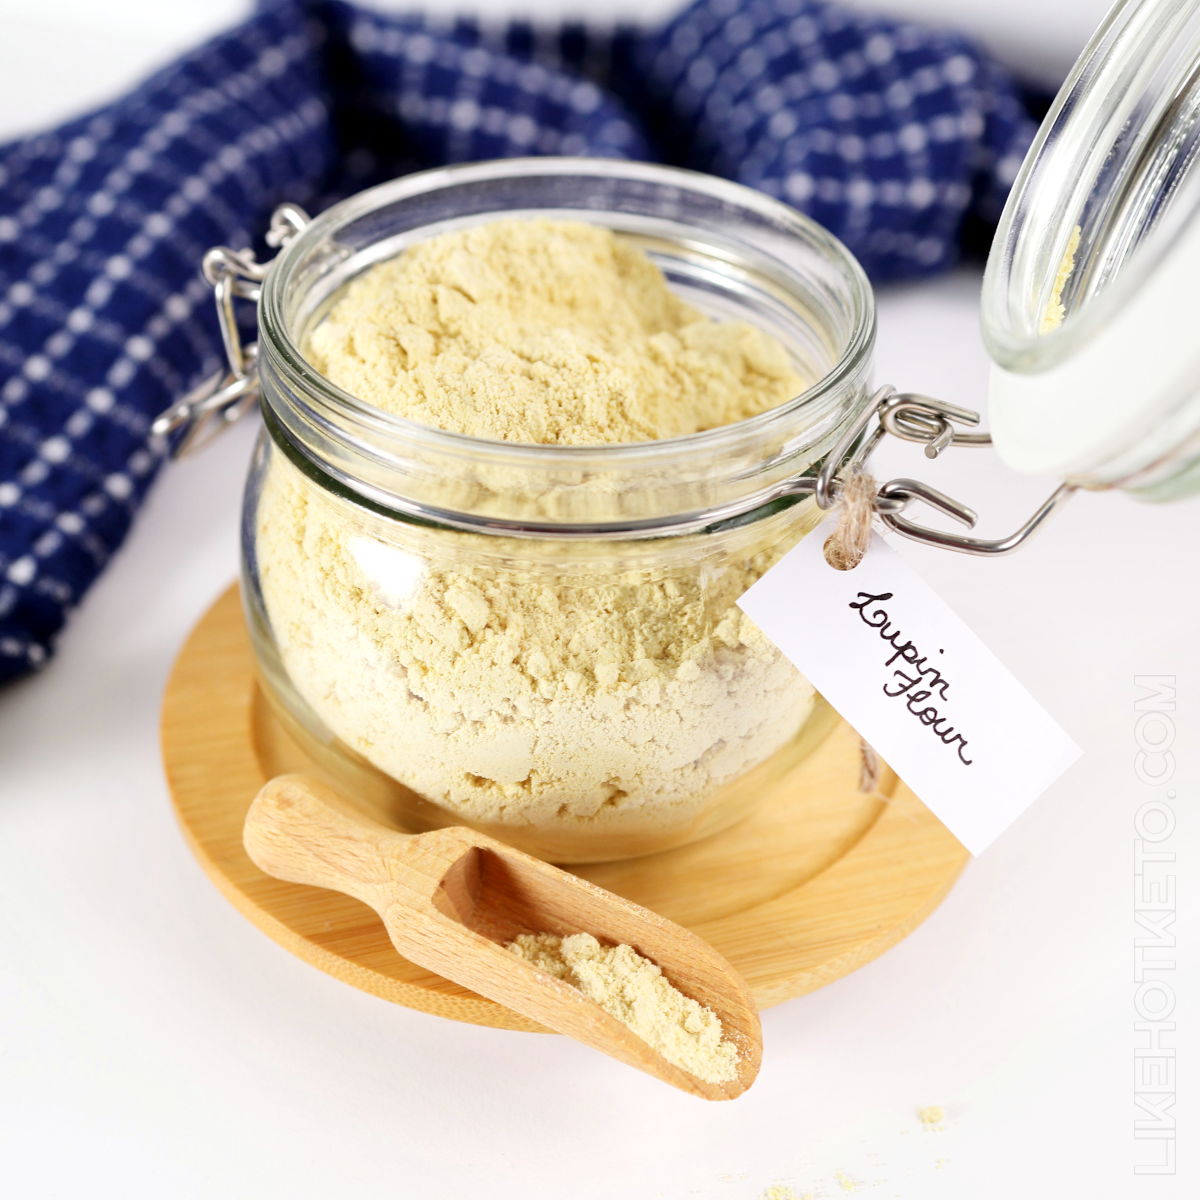 Open mason jar filled with lupin flour, and lupin flour on a wooden spoon.